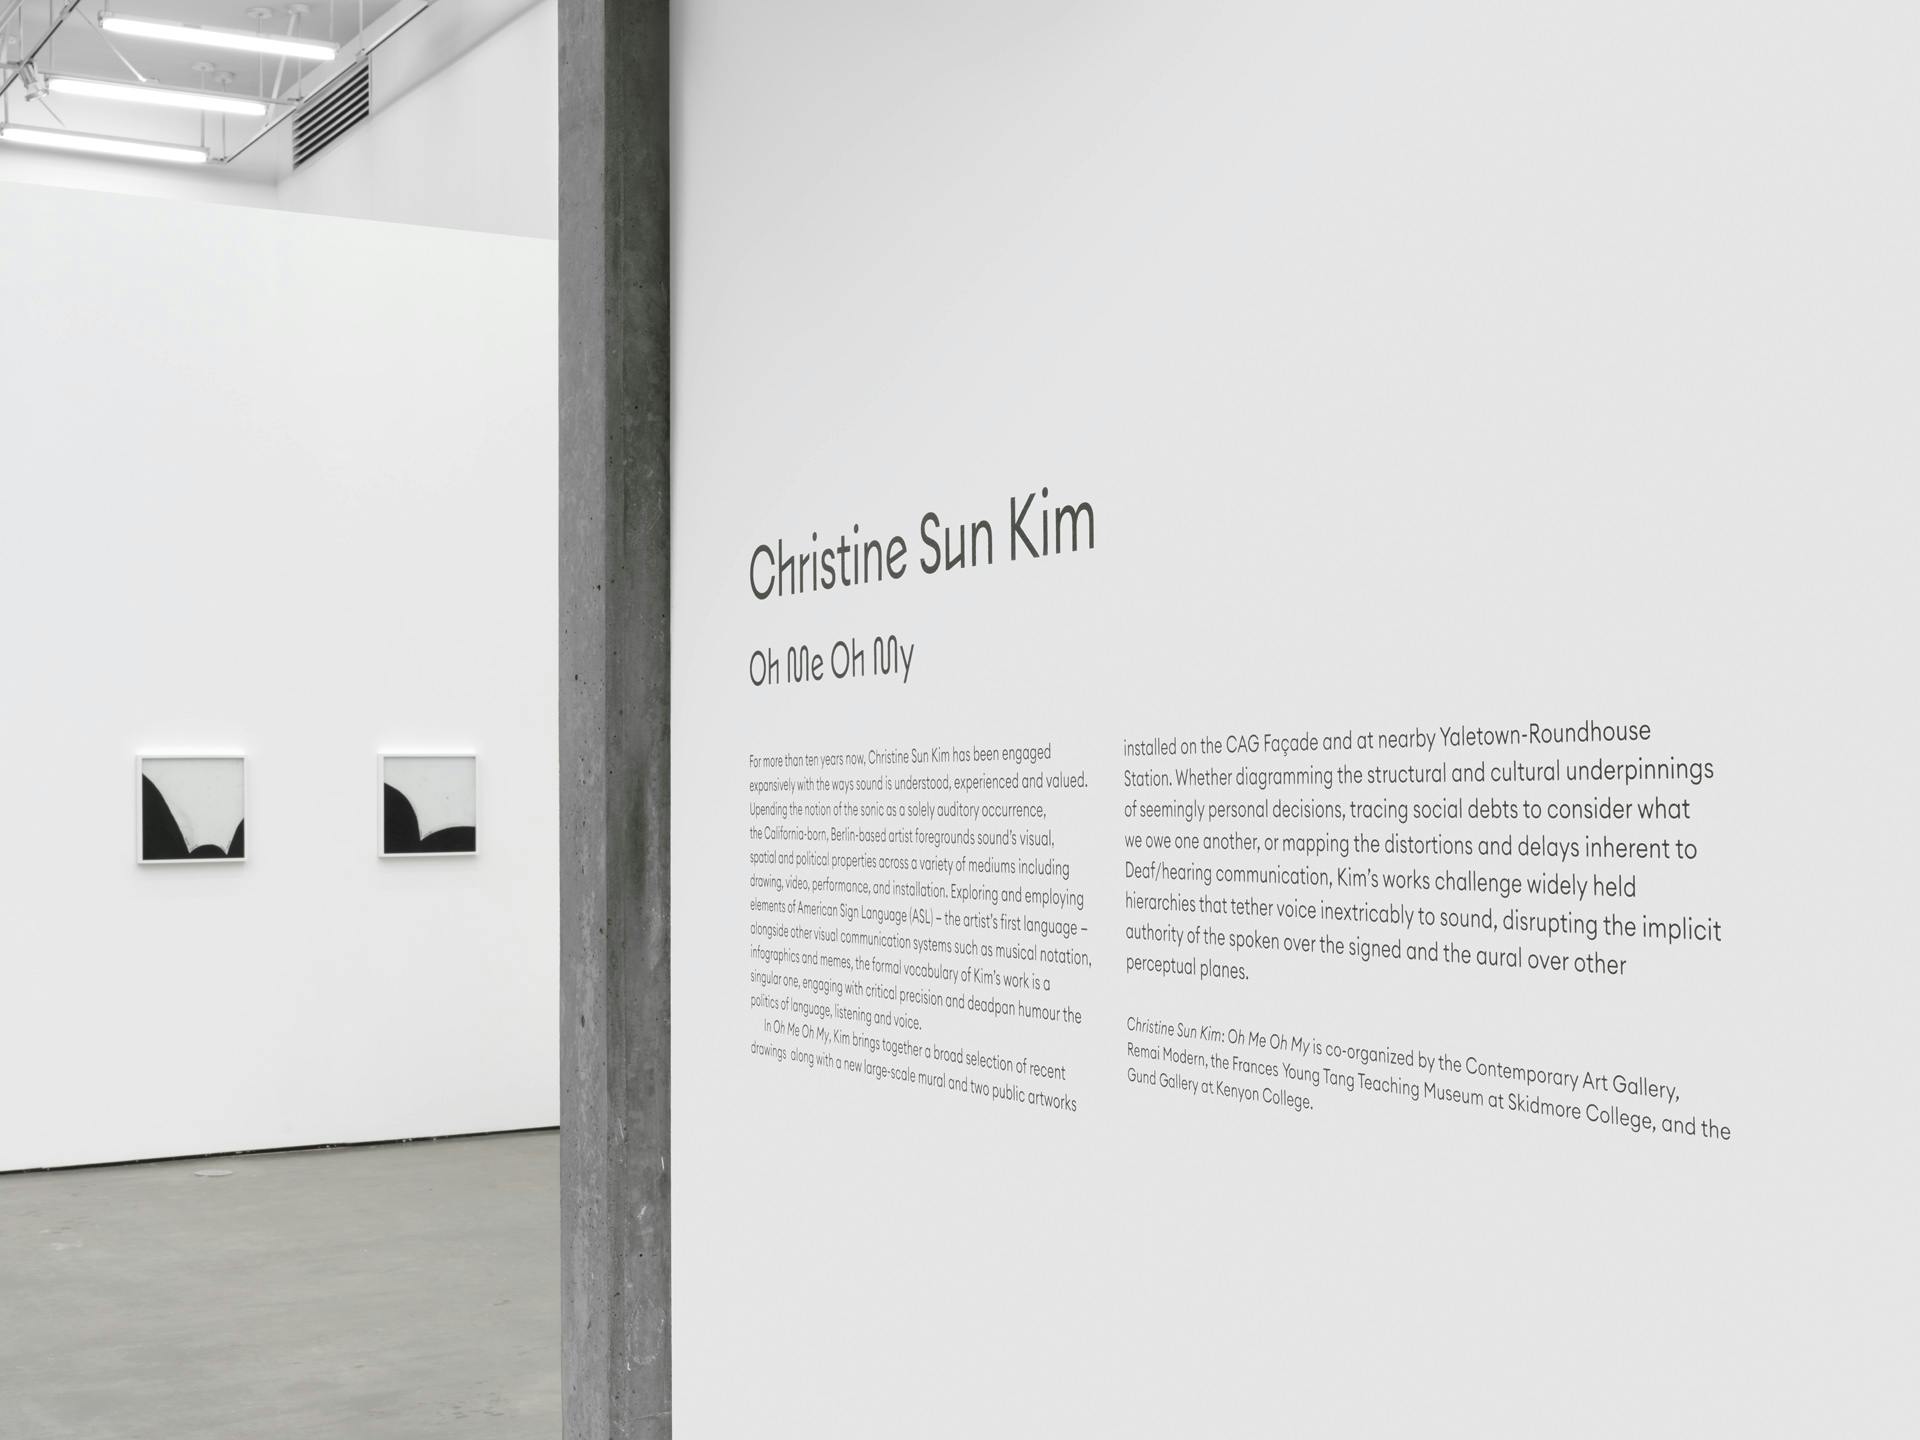 Entryway into a gallery with two drawings by Christine Sun Kim visible on an interior wall. Drawings each feature curved black shapes on a white background.